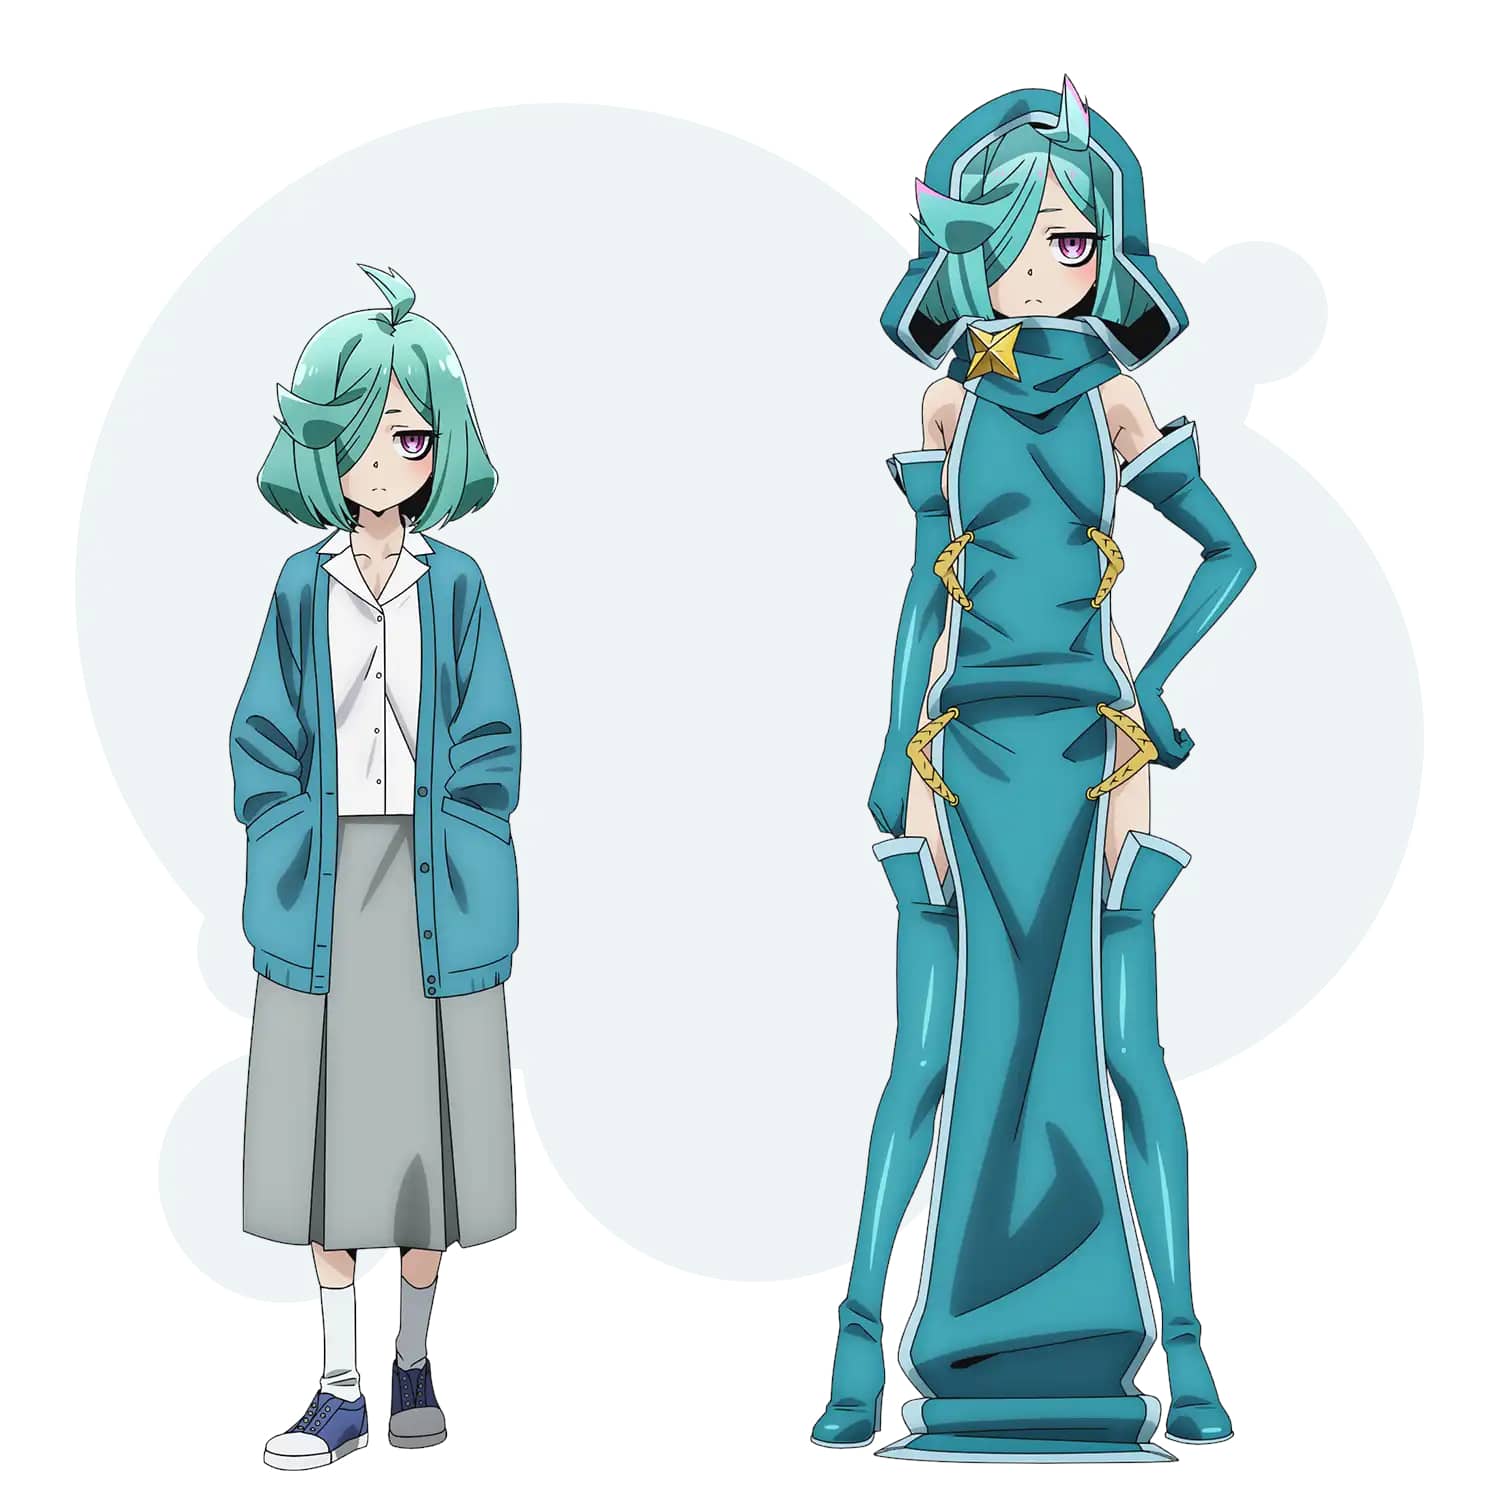 Character Design de Nemo Anemo pour l'anime Looking up to magical girls